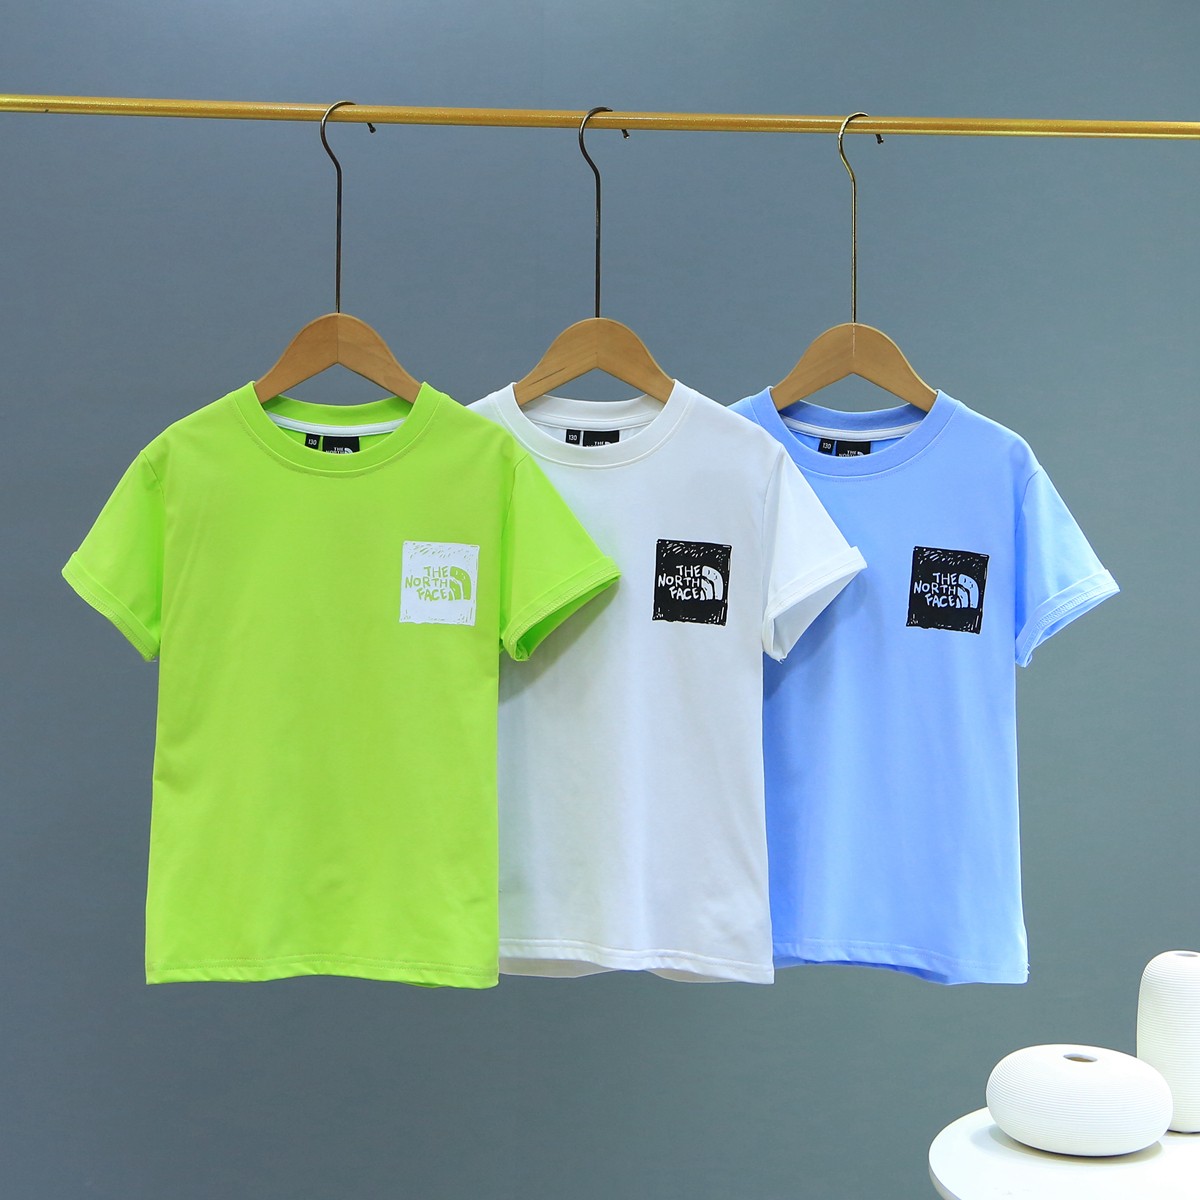 Luxury Cheap
 The North Face Clothing T-Shirt Blue Fluorescent Green White Printing Kids Boy Cotton Summer Collection Short Sleeve